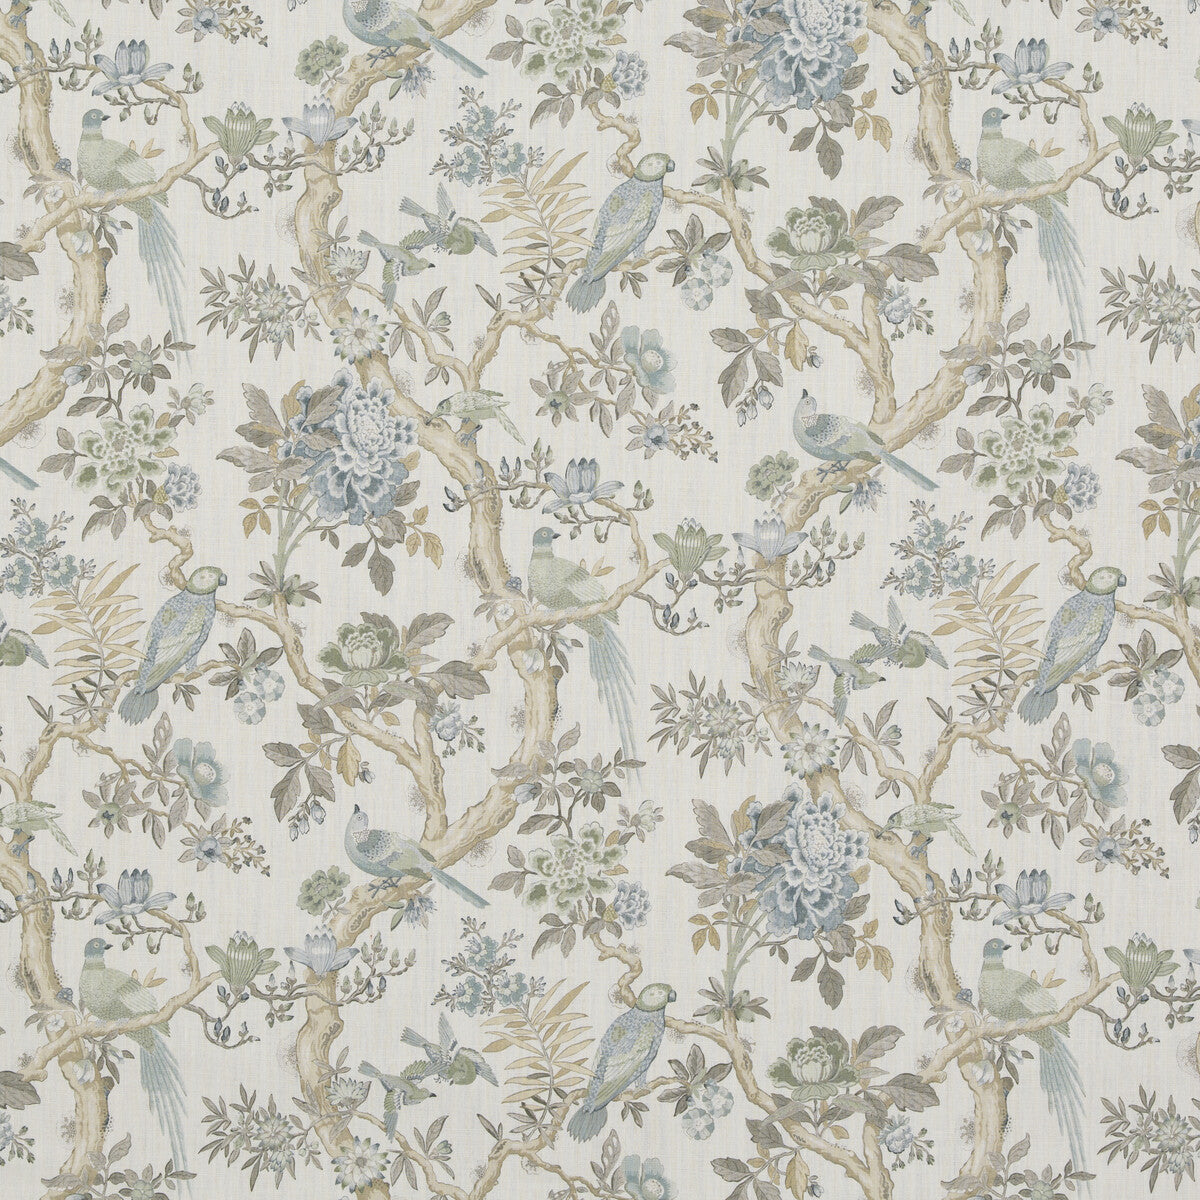 Eltham fabric in aqua color - pattern BP10948.4.0 - by G P &amp; J Baker in the Ashmore collection